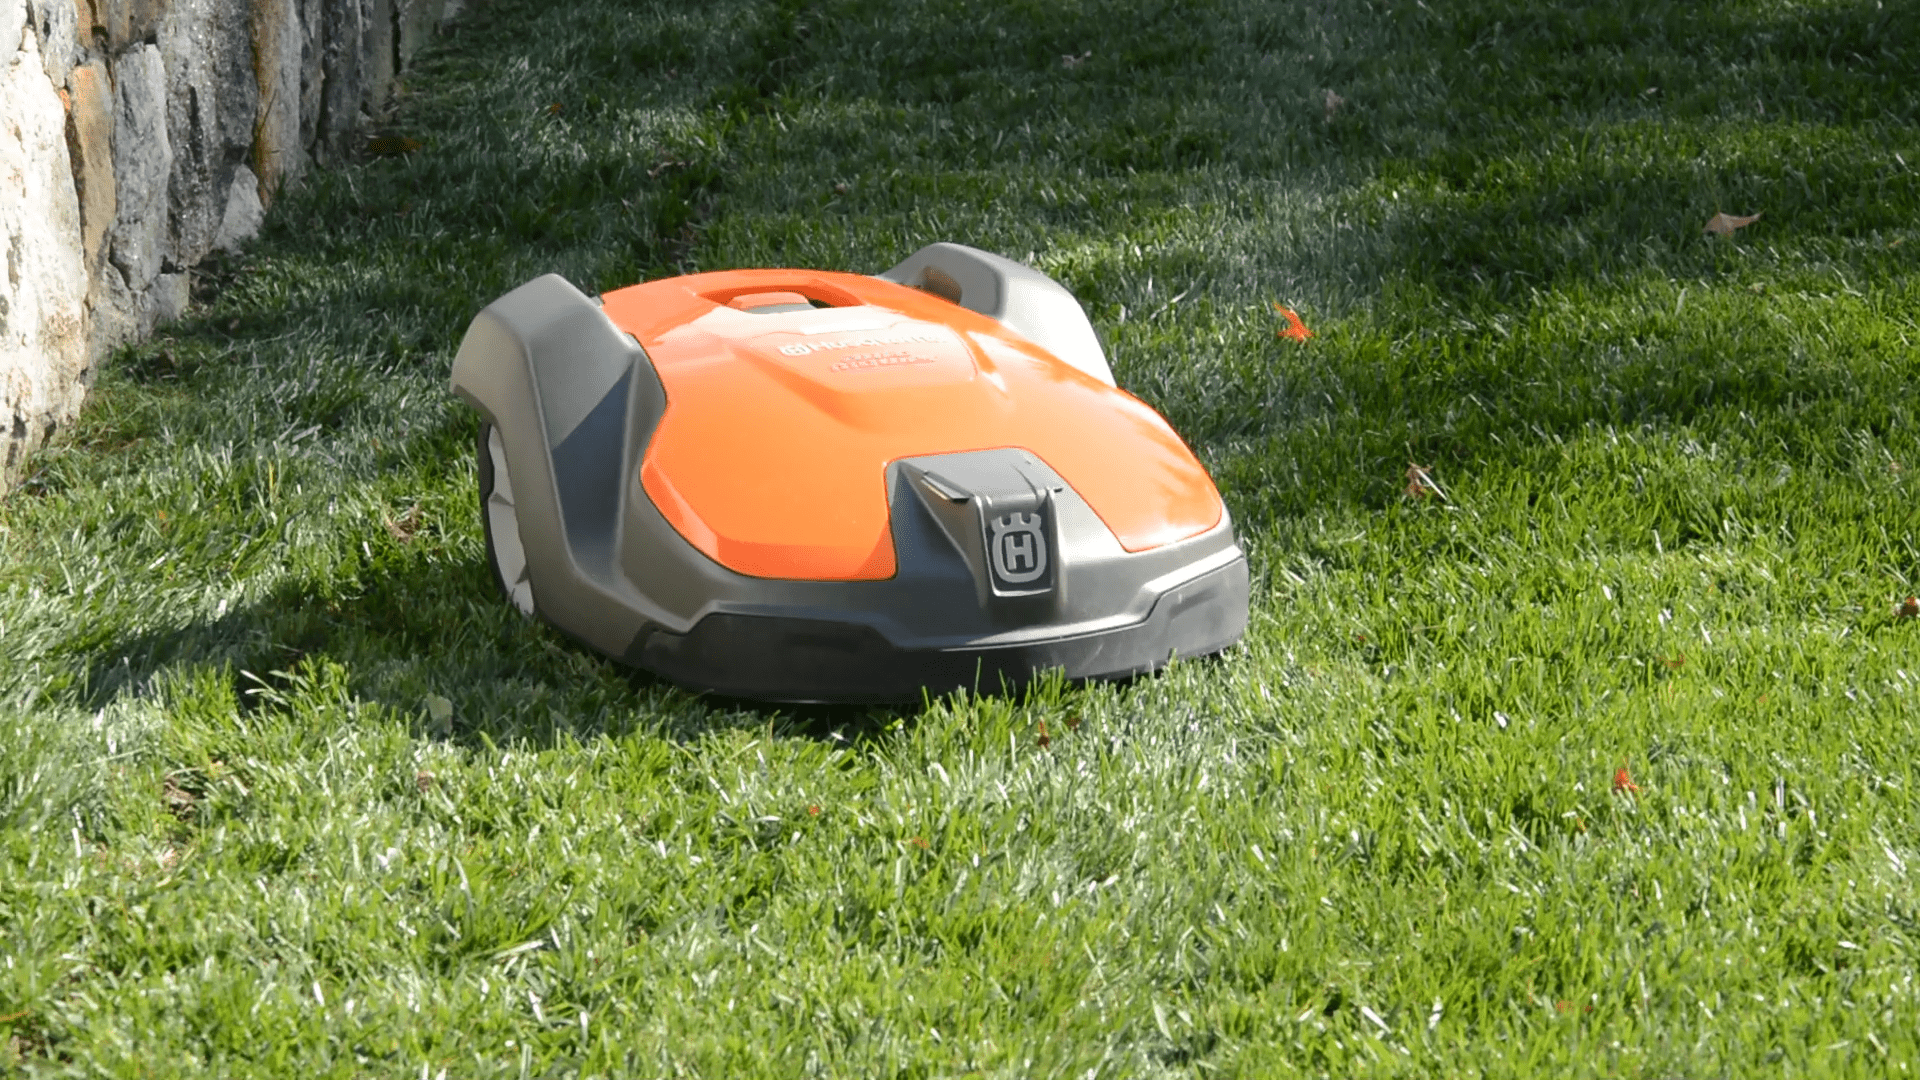 An orange and gray robotic lawn mower rests on a lush green lawn near a stone boundary under bright sunlight. The grass appears freshly trimmed.